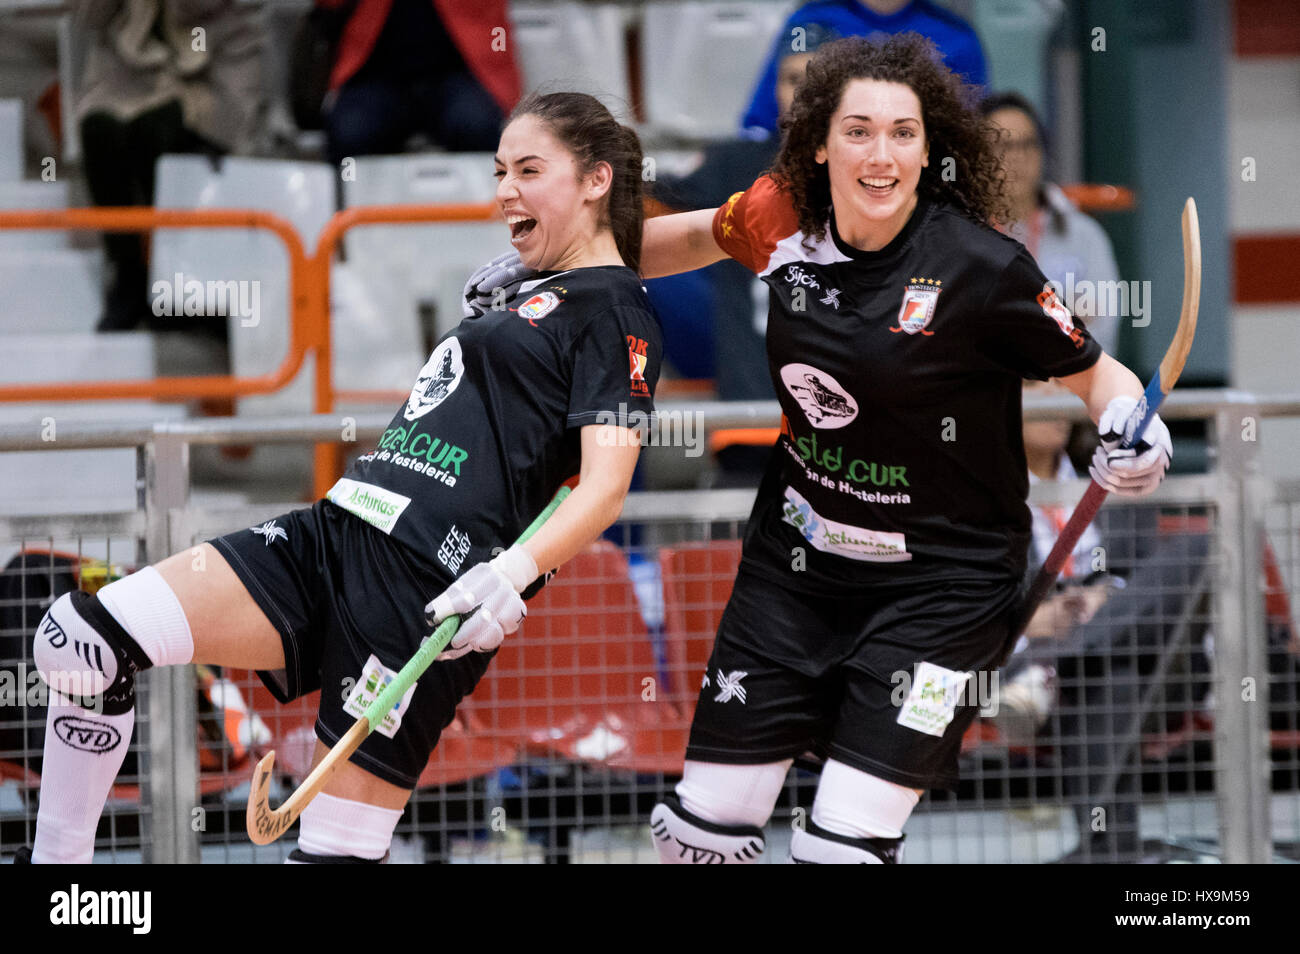 Gijon, Spain. 25th March, 2017. Marta Gonzalez Piquero (Gijon HC) celebrates the golden goal of her team with Anna Casarramona (Gijon HC) during the rink hockey match of FSemifinal of CERS Final Four Female Euroleague Cup between SL Benfica and Hostelcur Gijon HC at Sports Center on March 24, 2016 in Gijon, Spain. ©David Gato/Alamy Live News Stock Photo